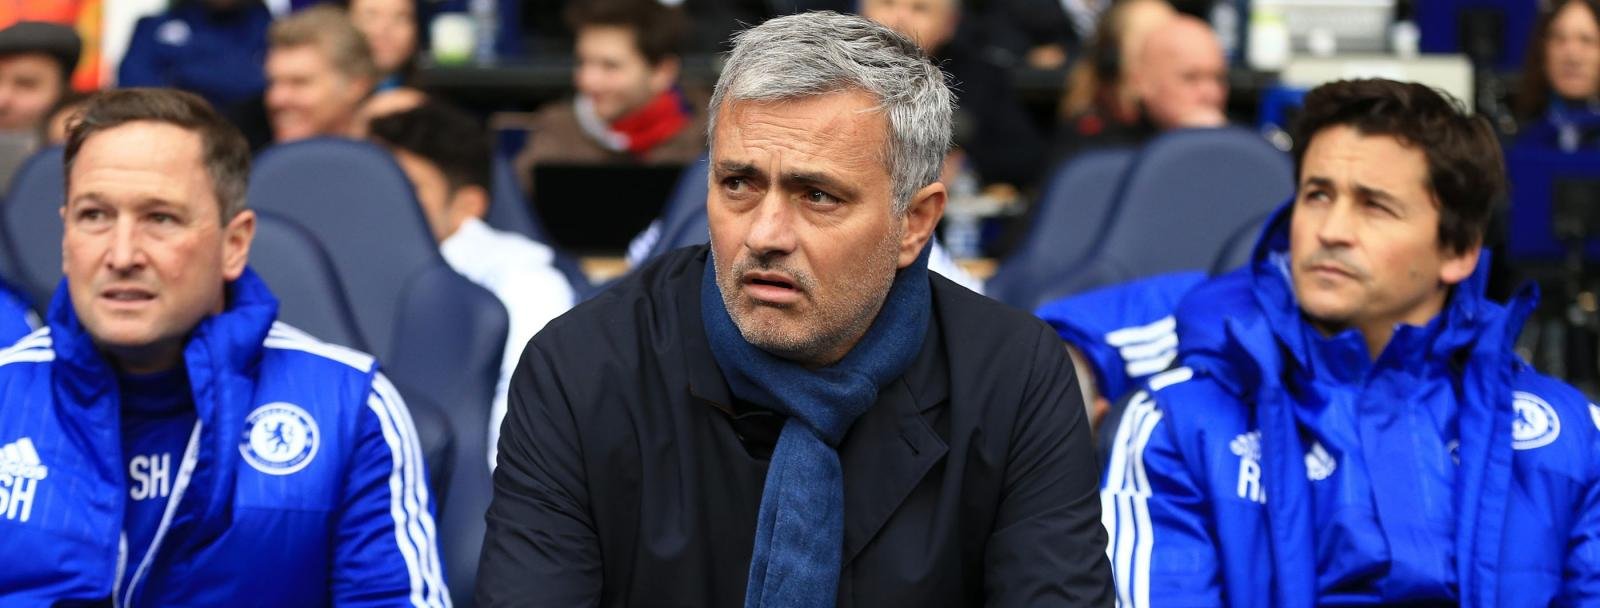 Next Man United Boss: Could Mourinho replace LvG?